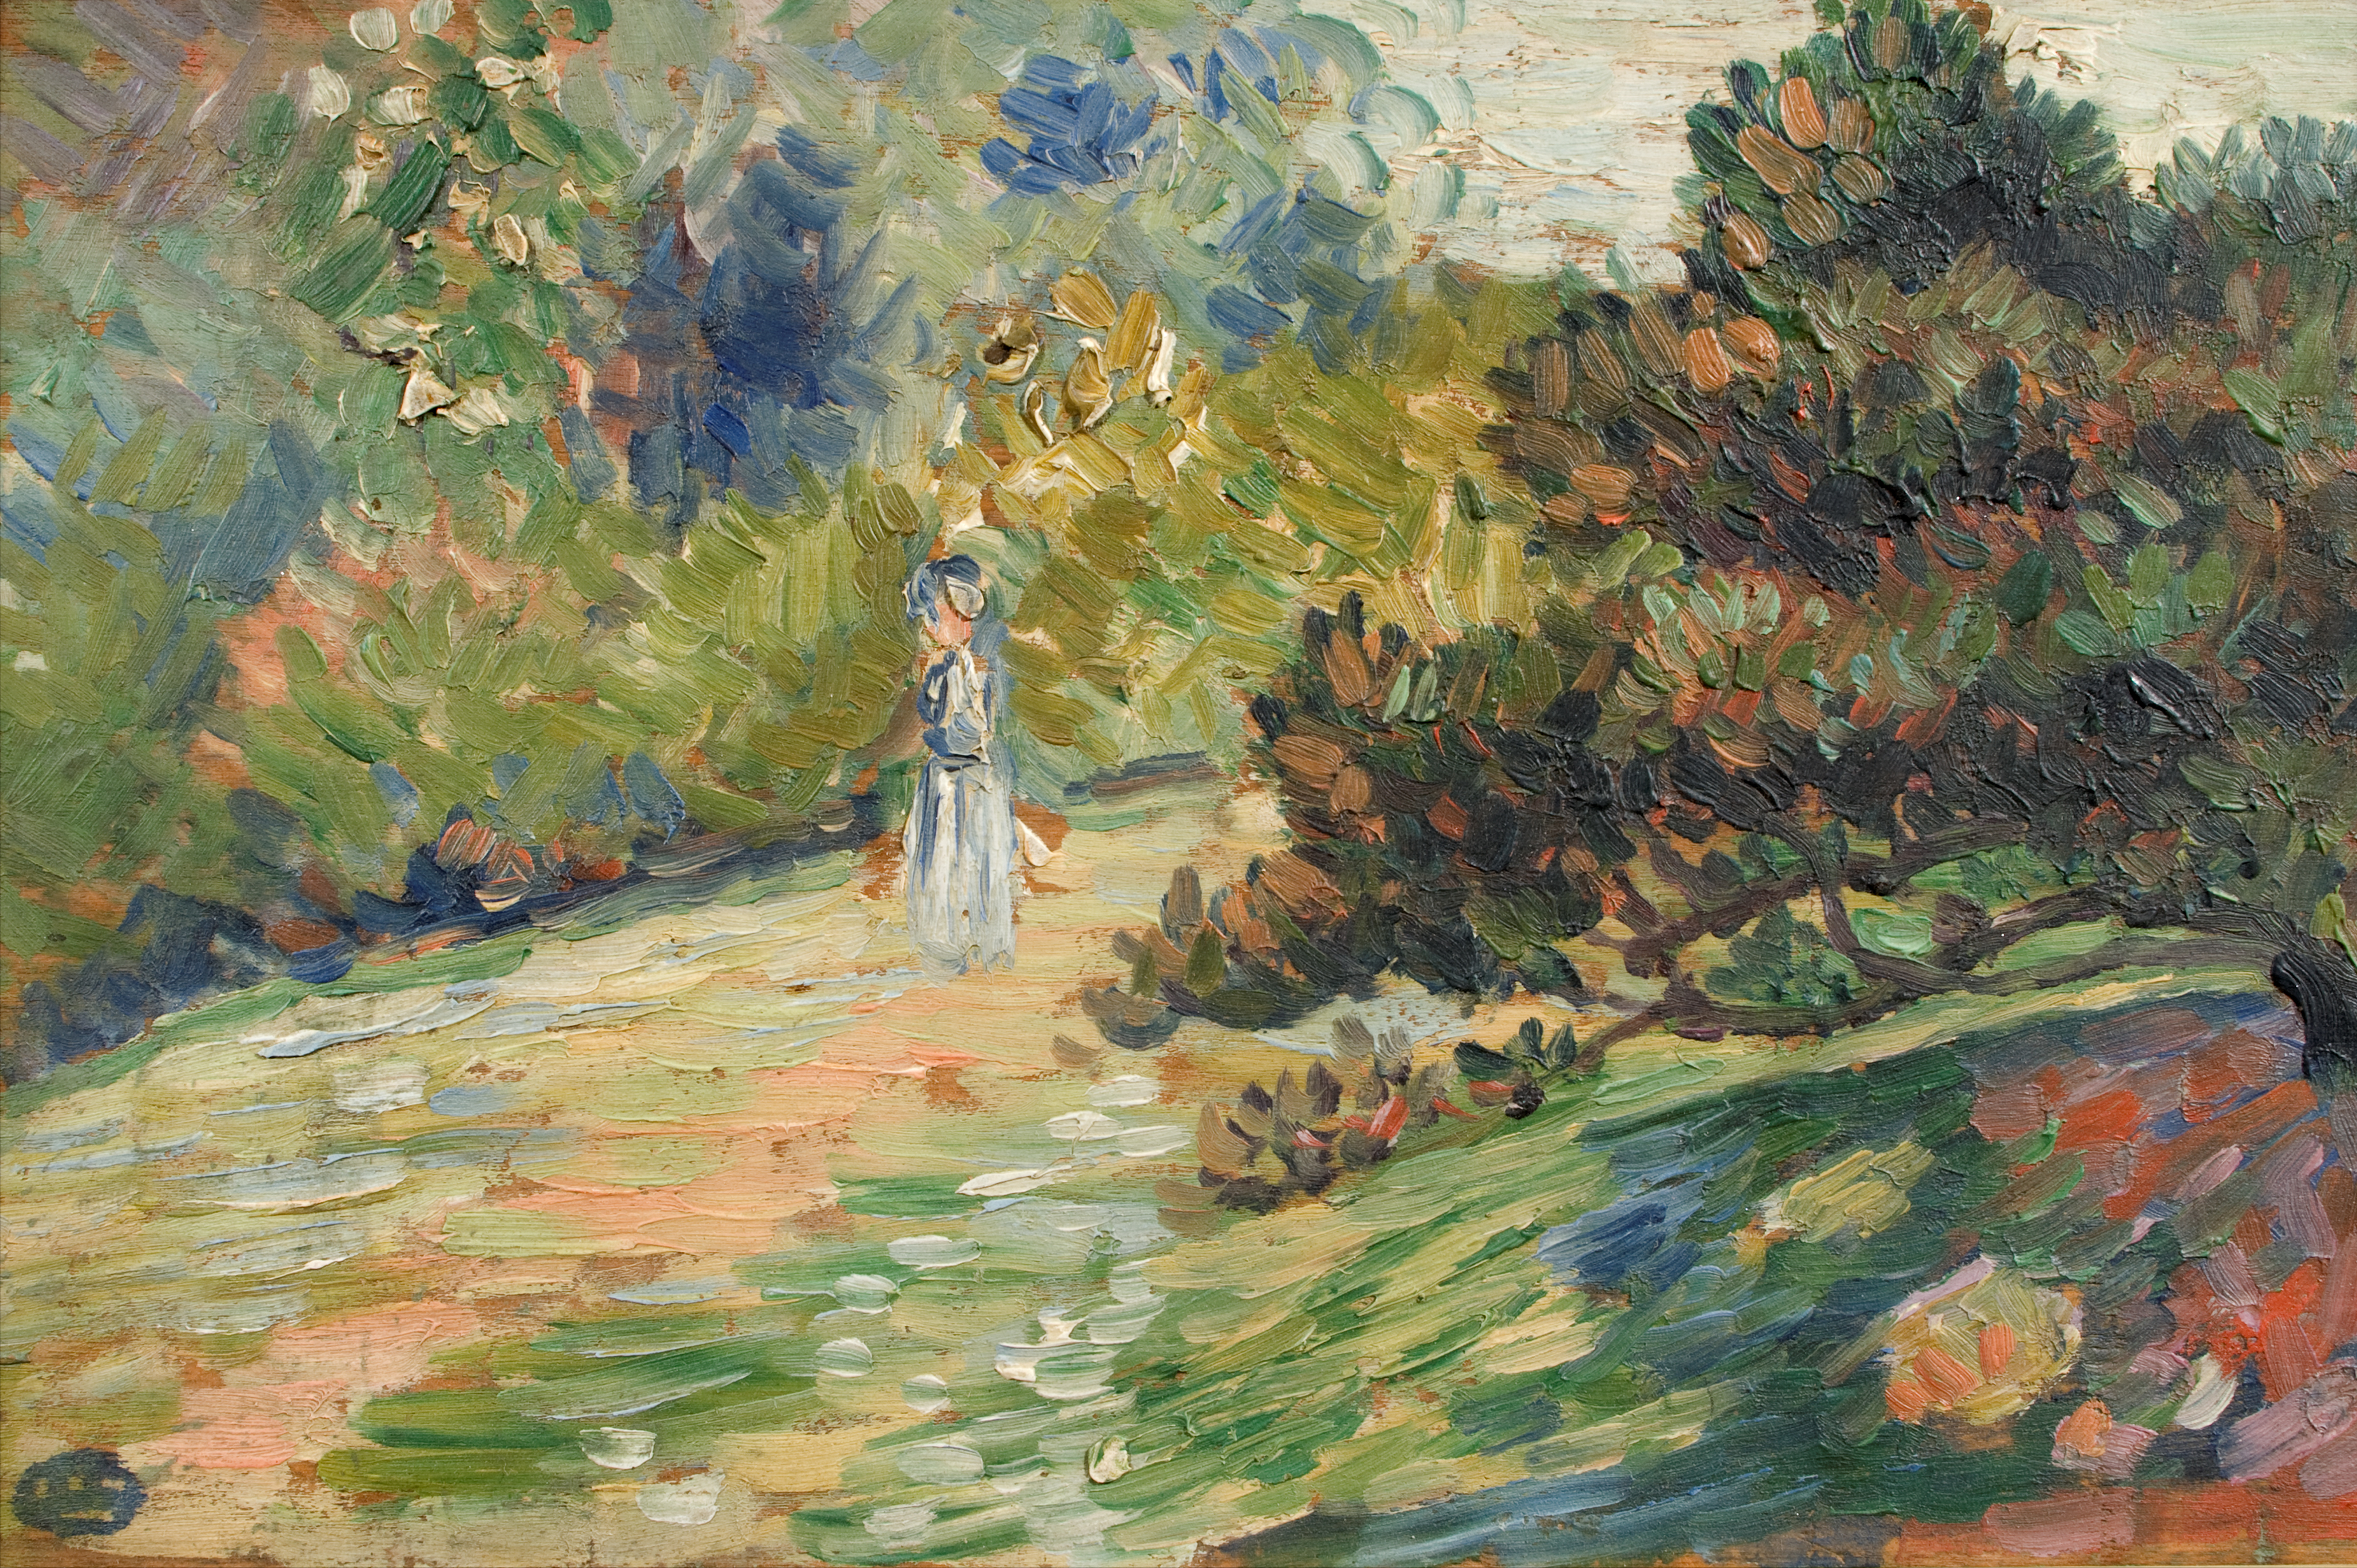 Painting of a garden with plants, flowers, trees on either side of a path the runs diagonally through the middle of the image with a figure standing on path dressed in pale blue clothes.